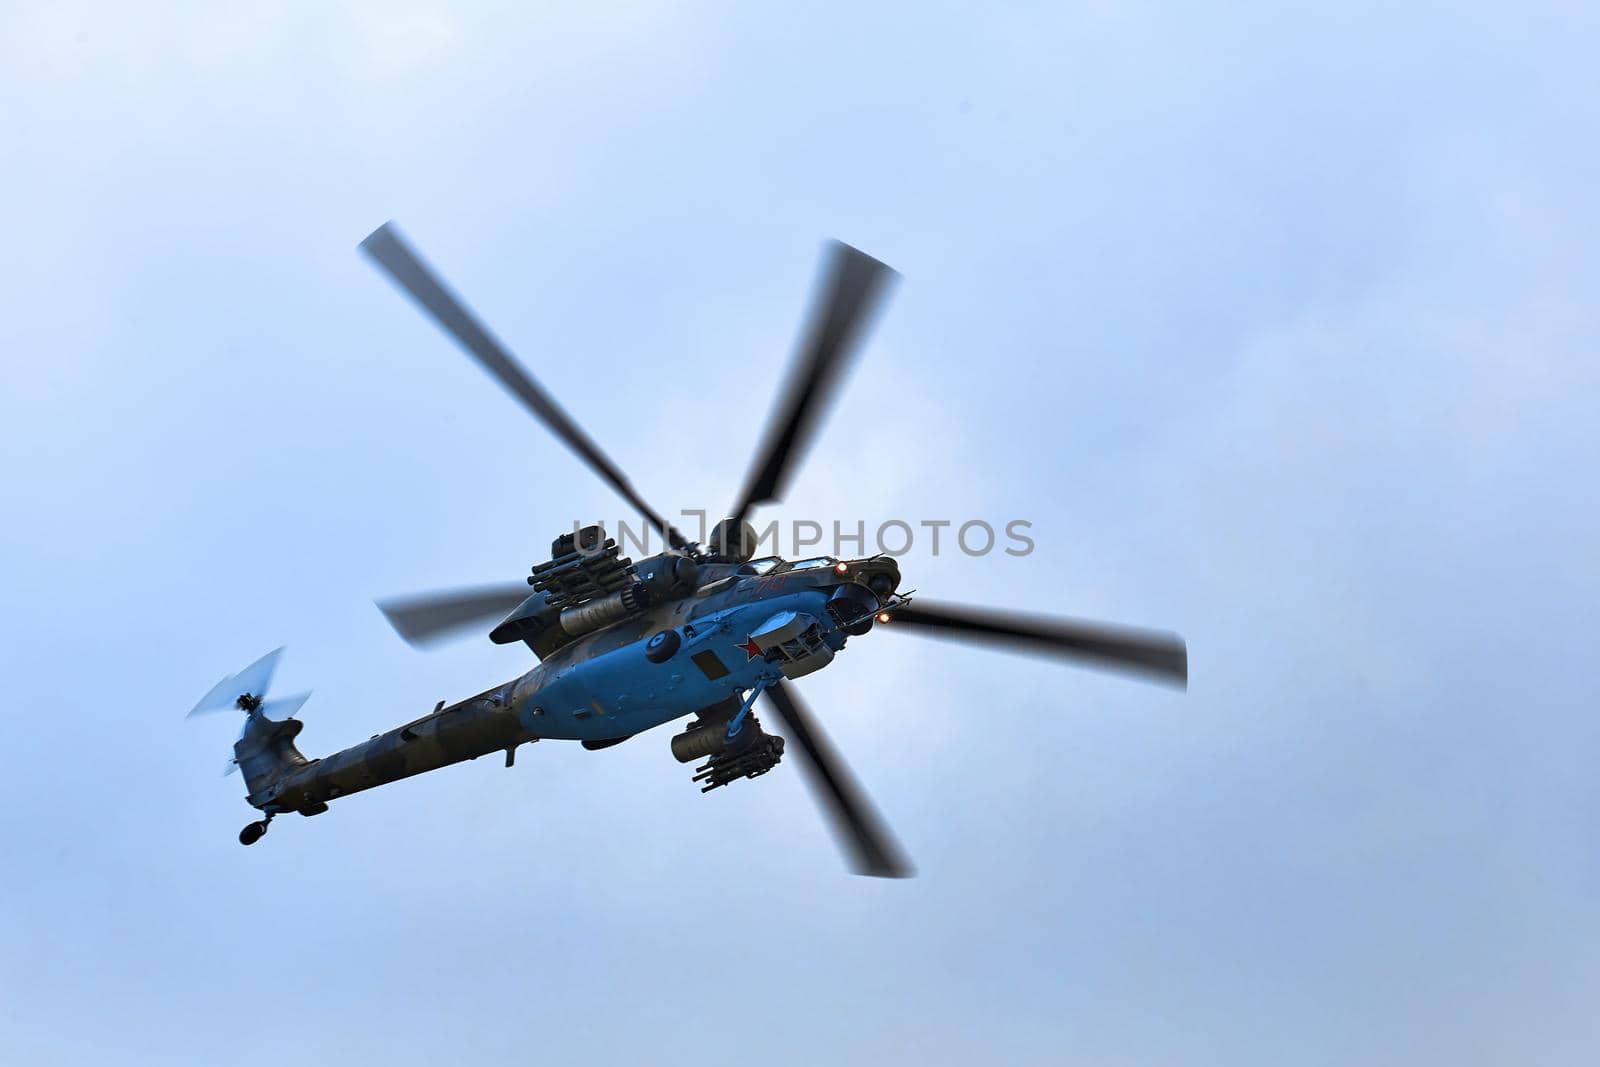 Mil Mi-28 Mi-28NM, codification of NATO: Havoc. Russian all-weather, day-night, military tandem, two-seat anti-armor attack helicopter on MAKS 2019 airshow. ZHUKOVSKY, RUSSIA, AUGUST 27, 2019 by EvgeniyQW